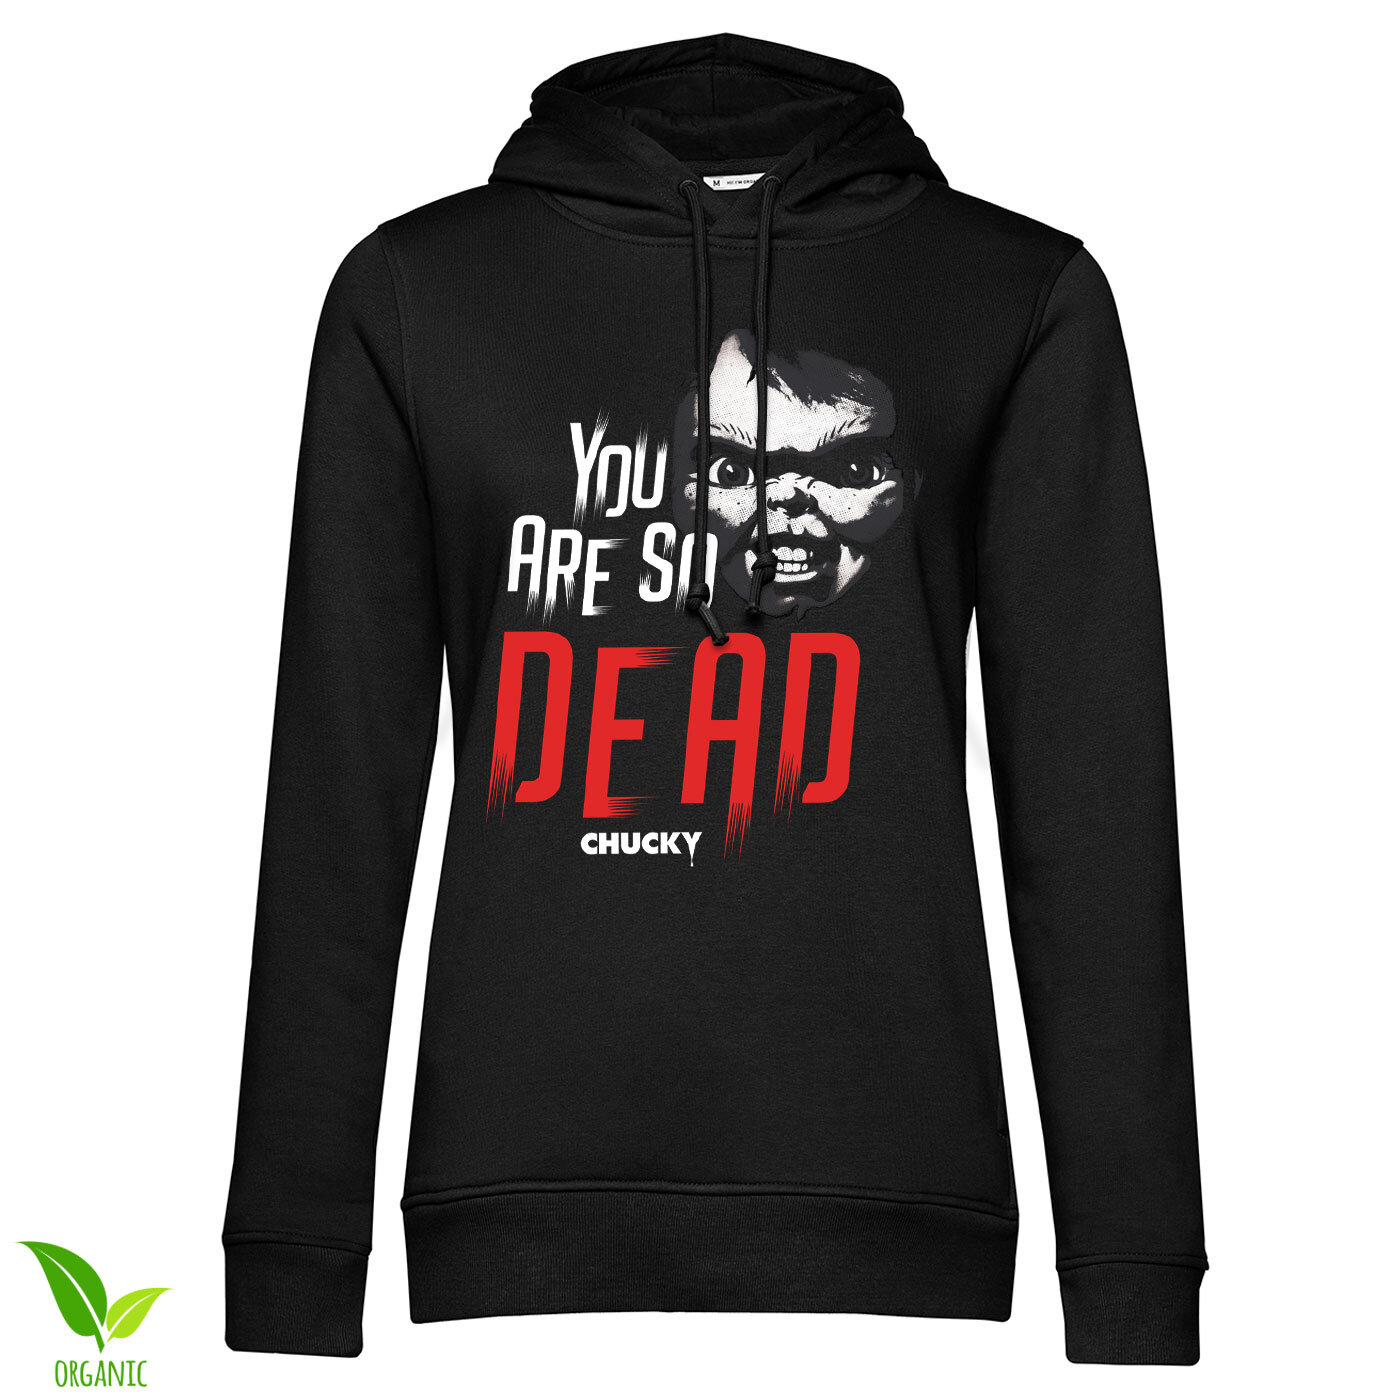 Chucky - You Are So Dead Girls Hoodie